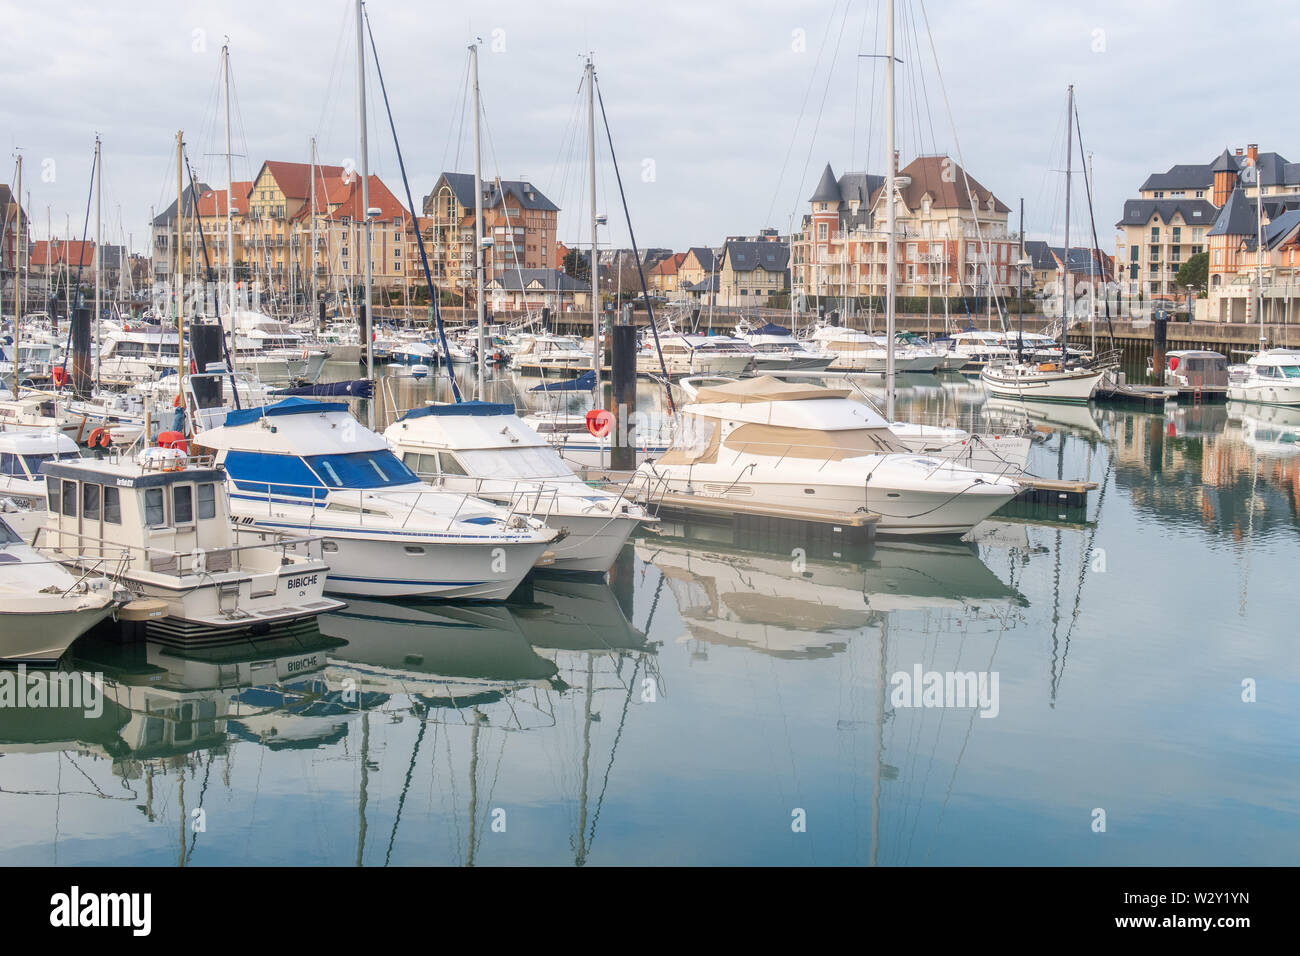 Dives-Sur-Mer, France - January 3, 2019: the harbour, boats, and buildings at dives-sur-mer Stock Photo